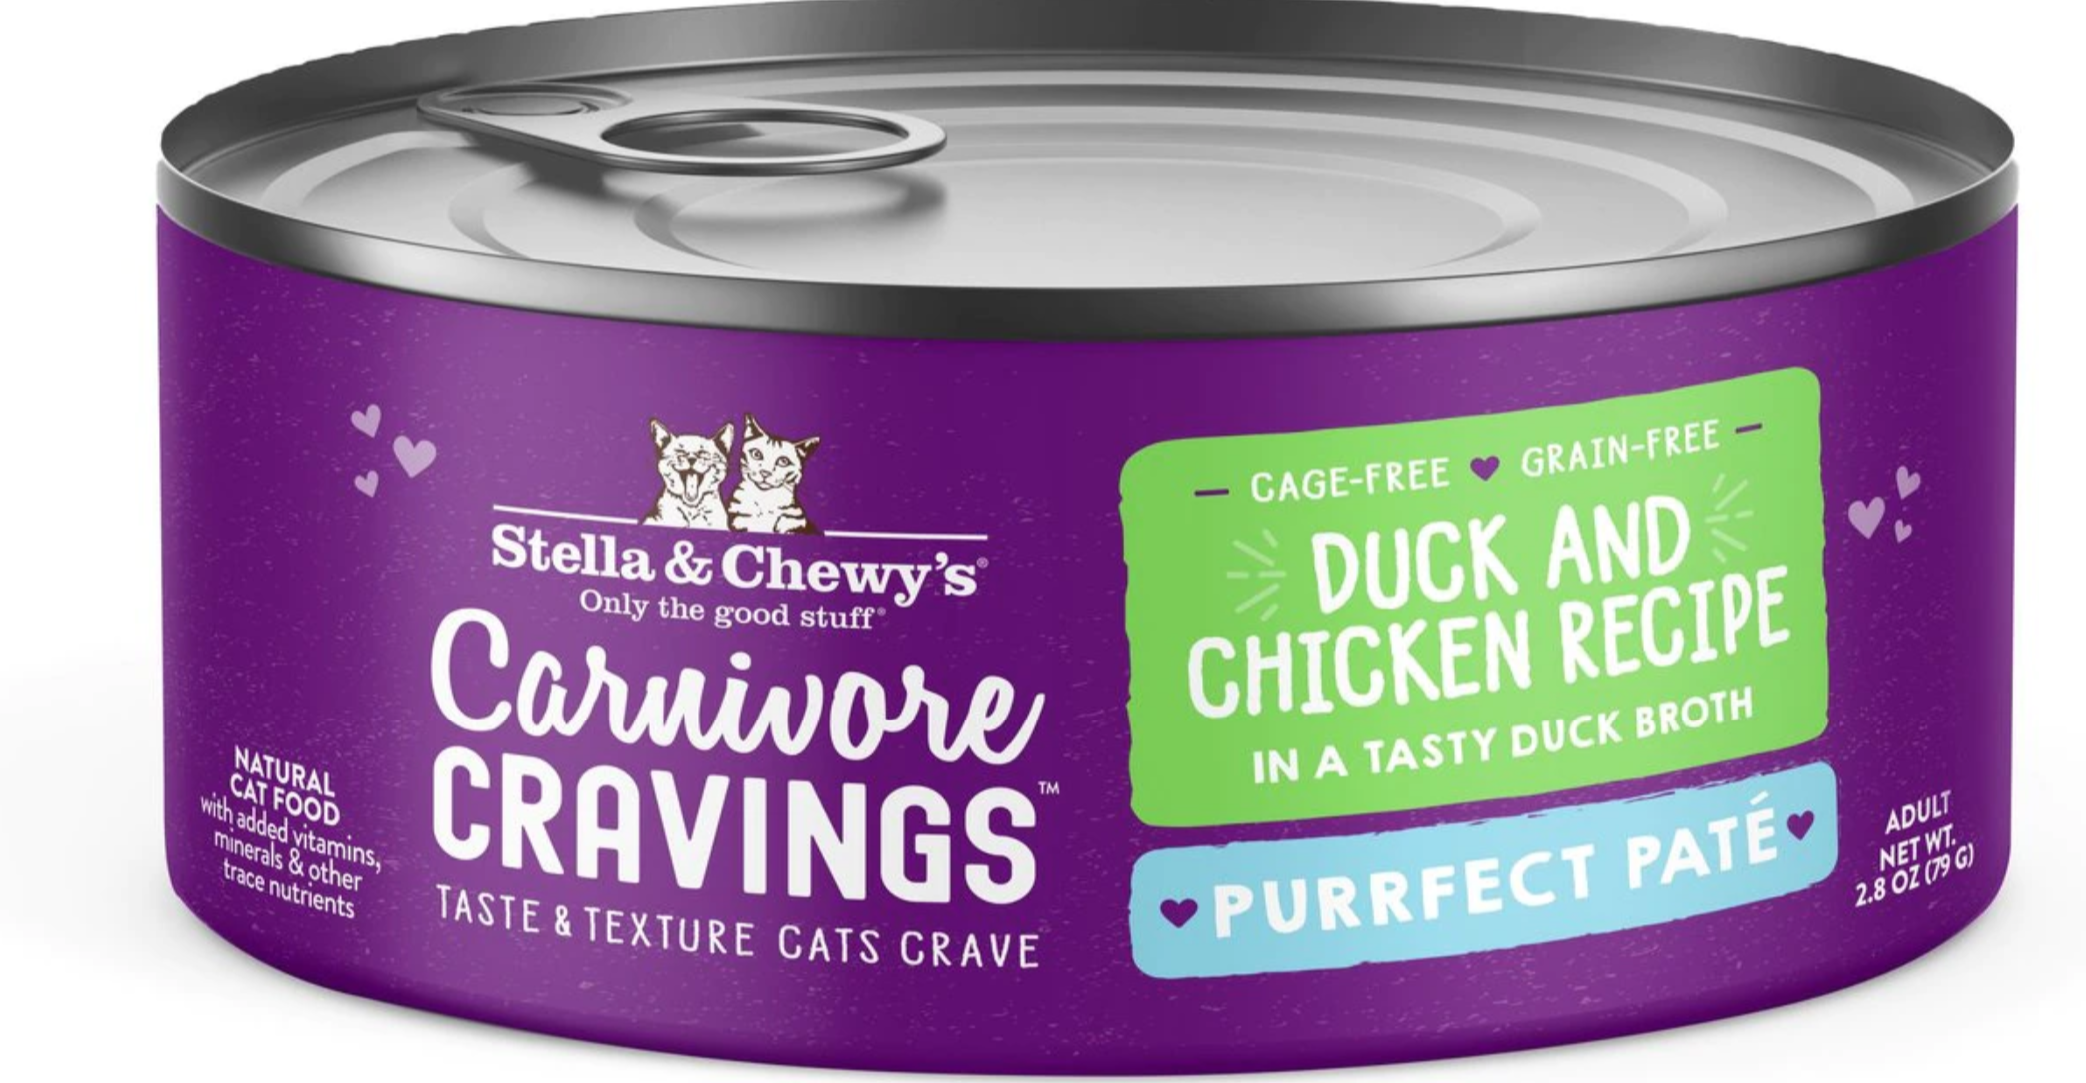 Stella & Chewy's Carnivore Cravings Purrfect Pate Duck & Chicken Recipe - 2.8oz Can